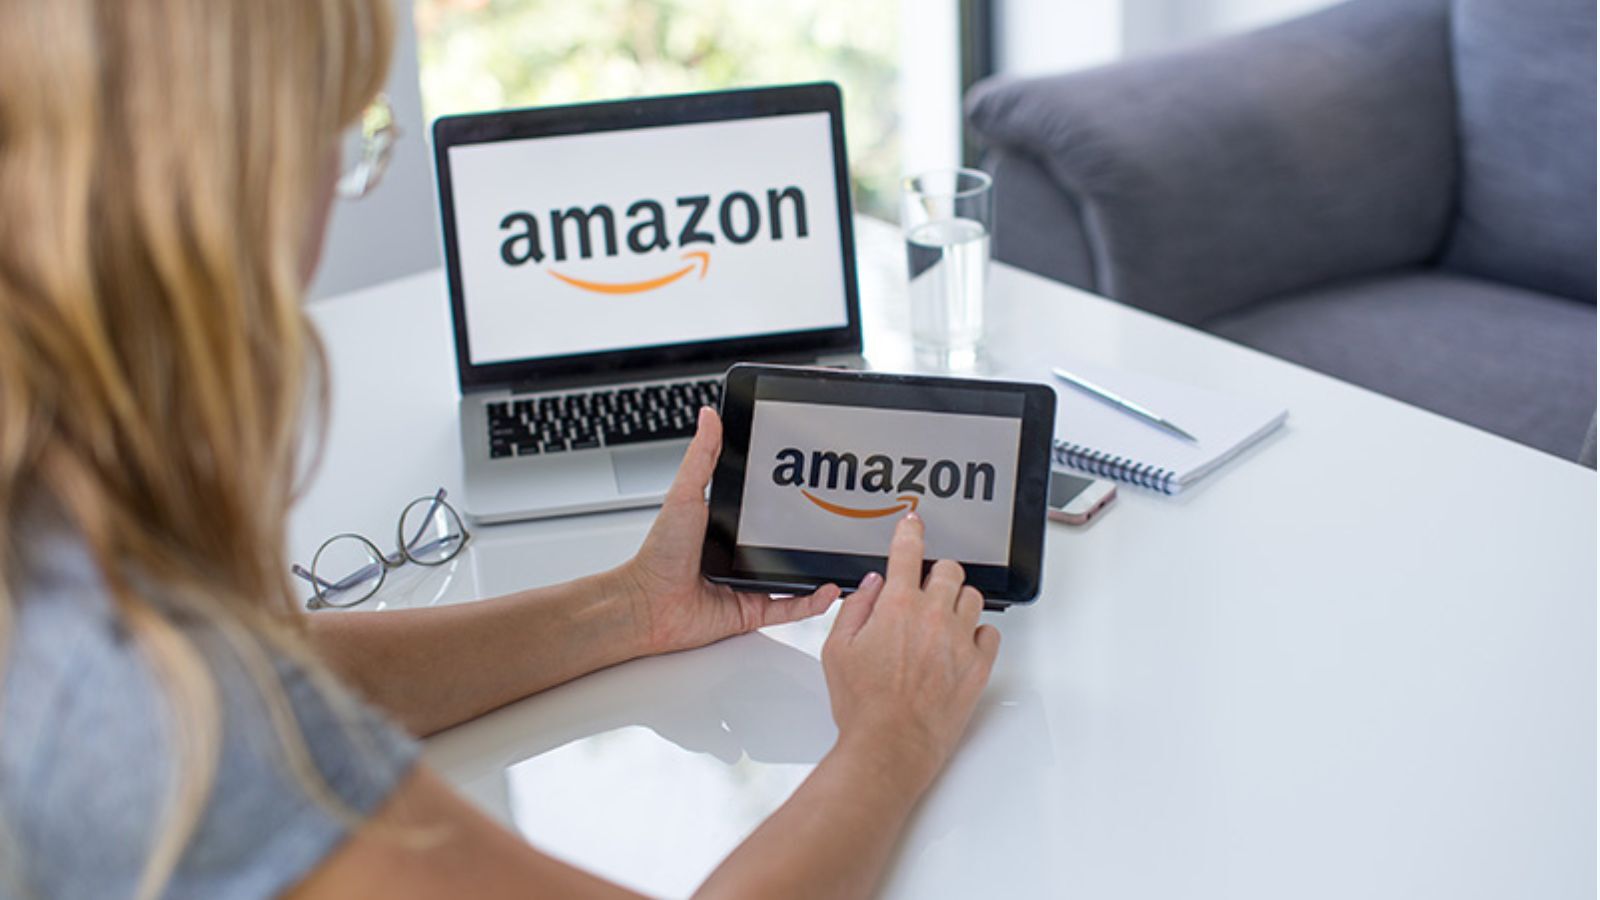 Does Amazon Offer Work From Home Jobs? (Something You Might Be Interested In)